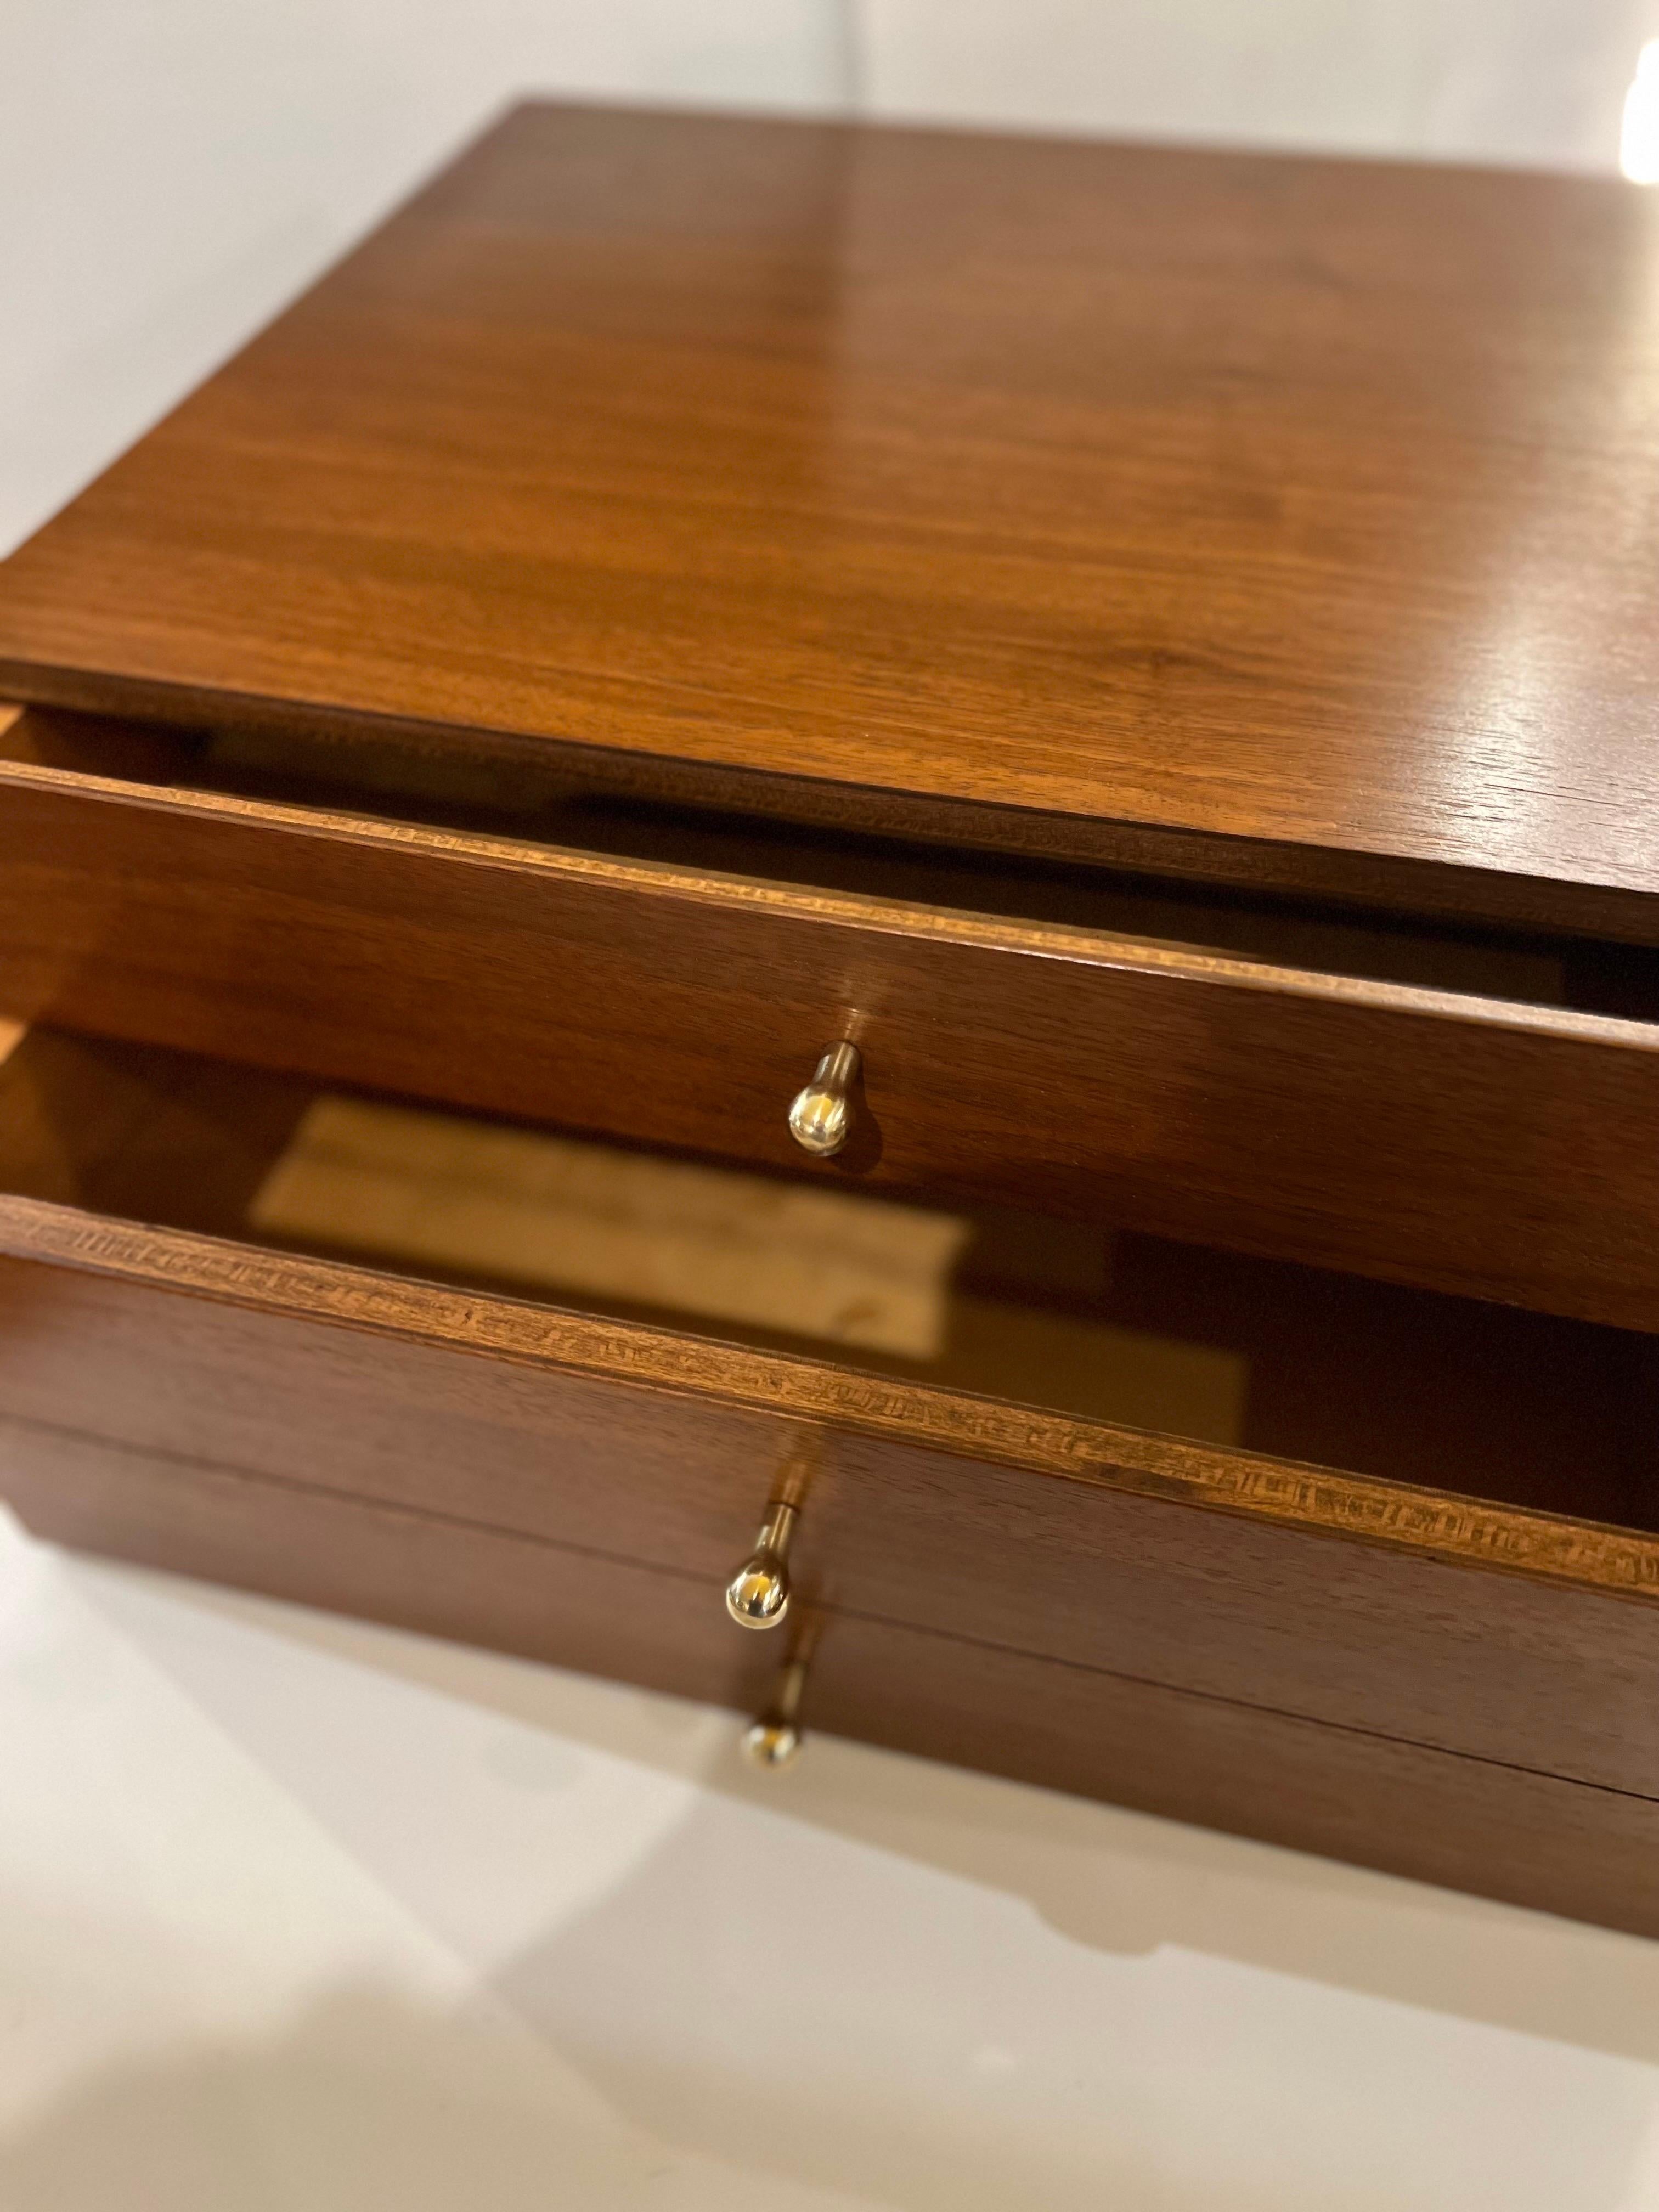 Petite & Rare Jewelry Chest by Arthur Umanoff in Walnut & Brass Midcentury In Excellent Condition For Sale In San Diego, CA